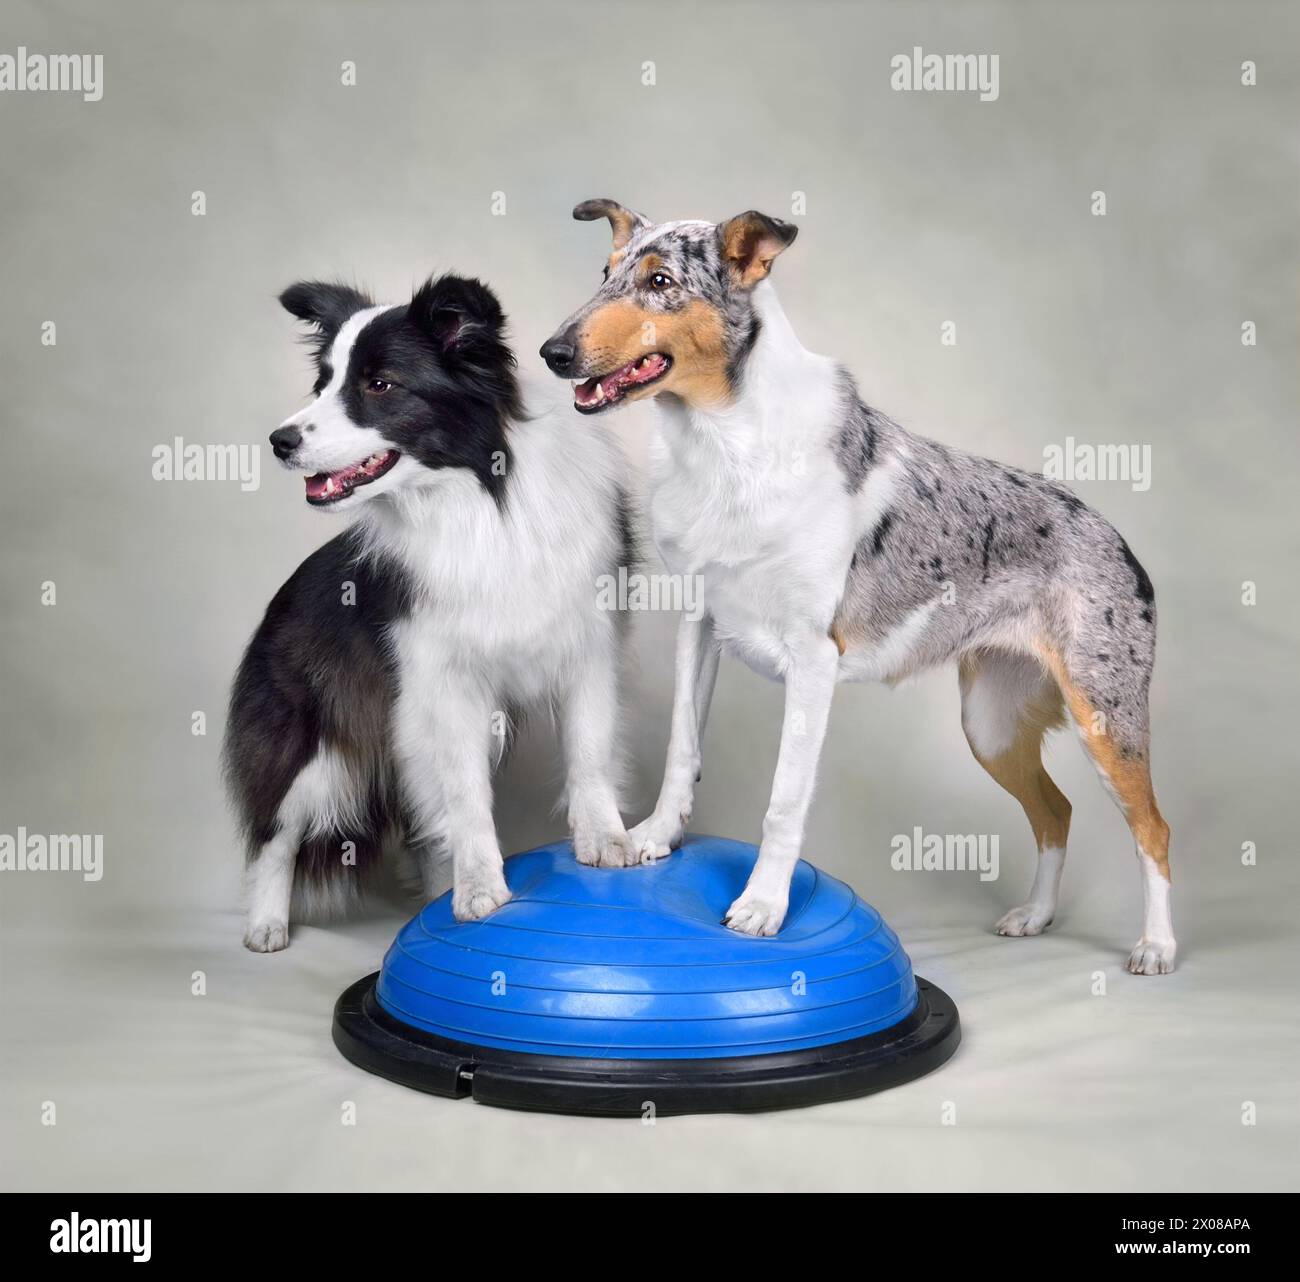 Border collie and Smooth Collie standing on a balance disc durig dog fitness trainig Stock Photo